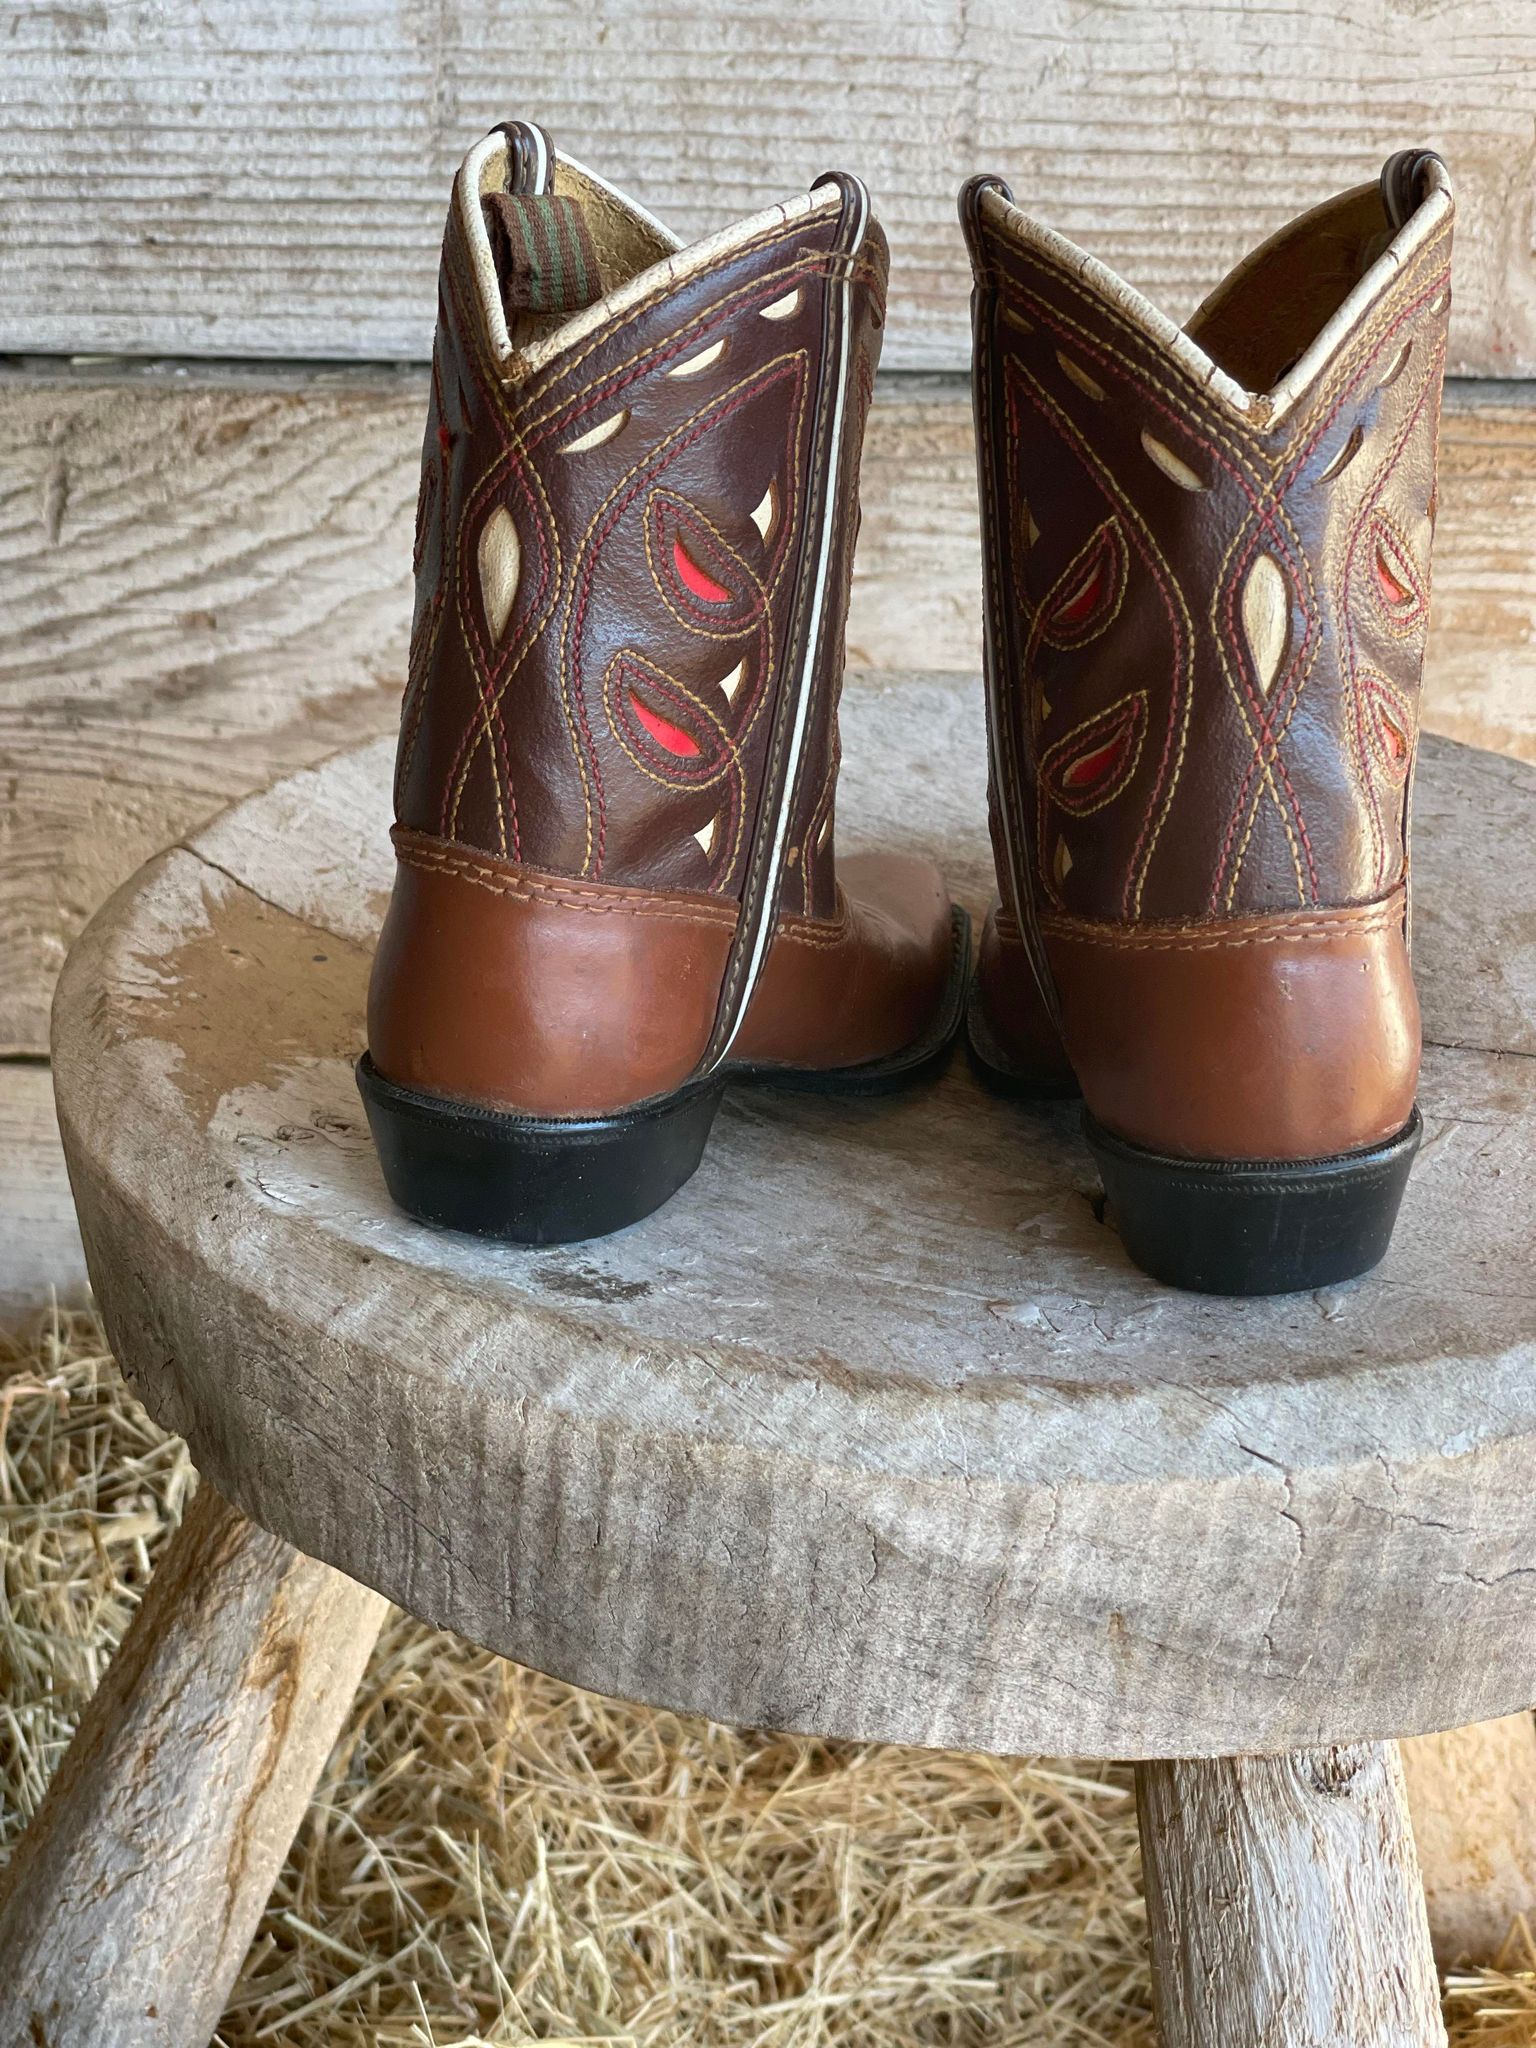 1950's Baby Cowboy Boots, Never Worn (4D)